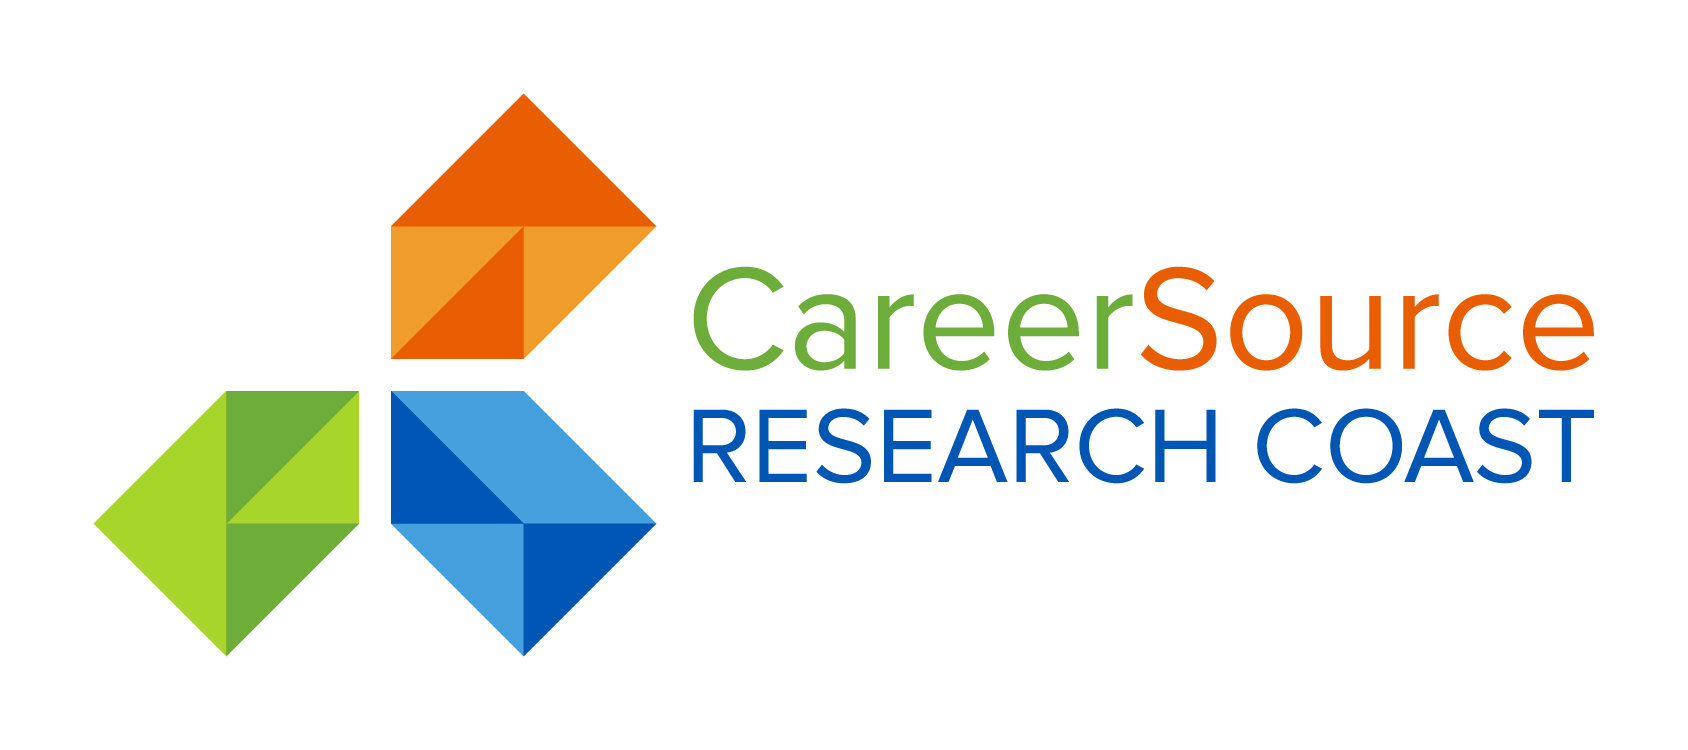 20 CareerSource Research Coast_Full Color